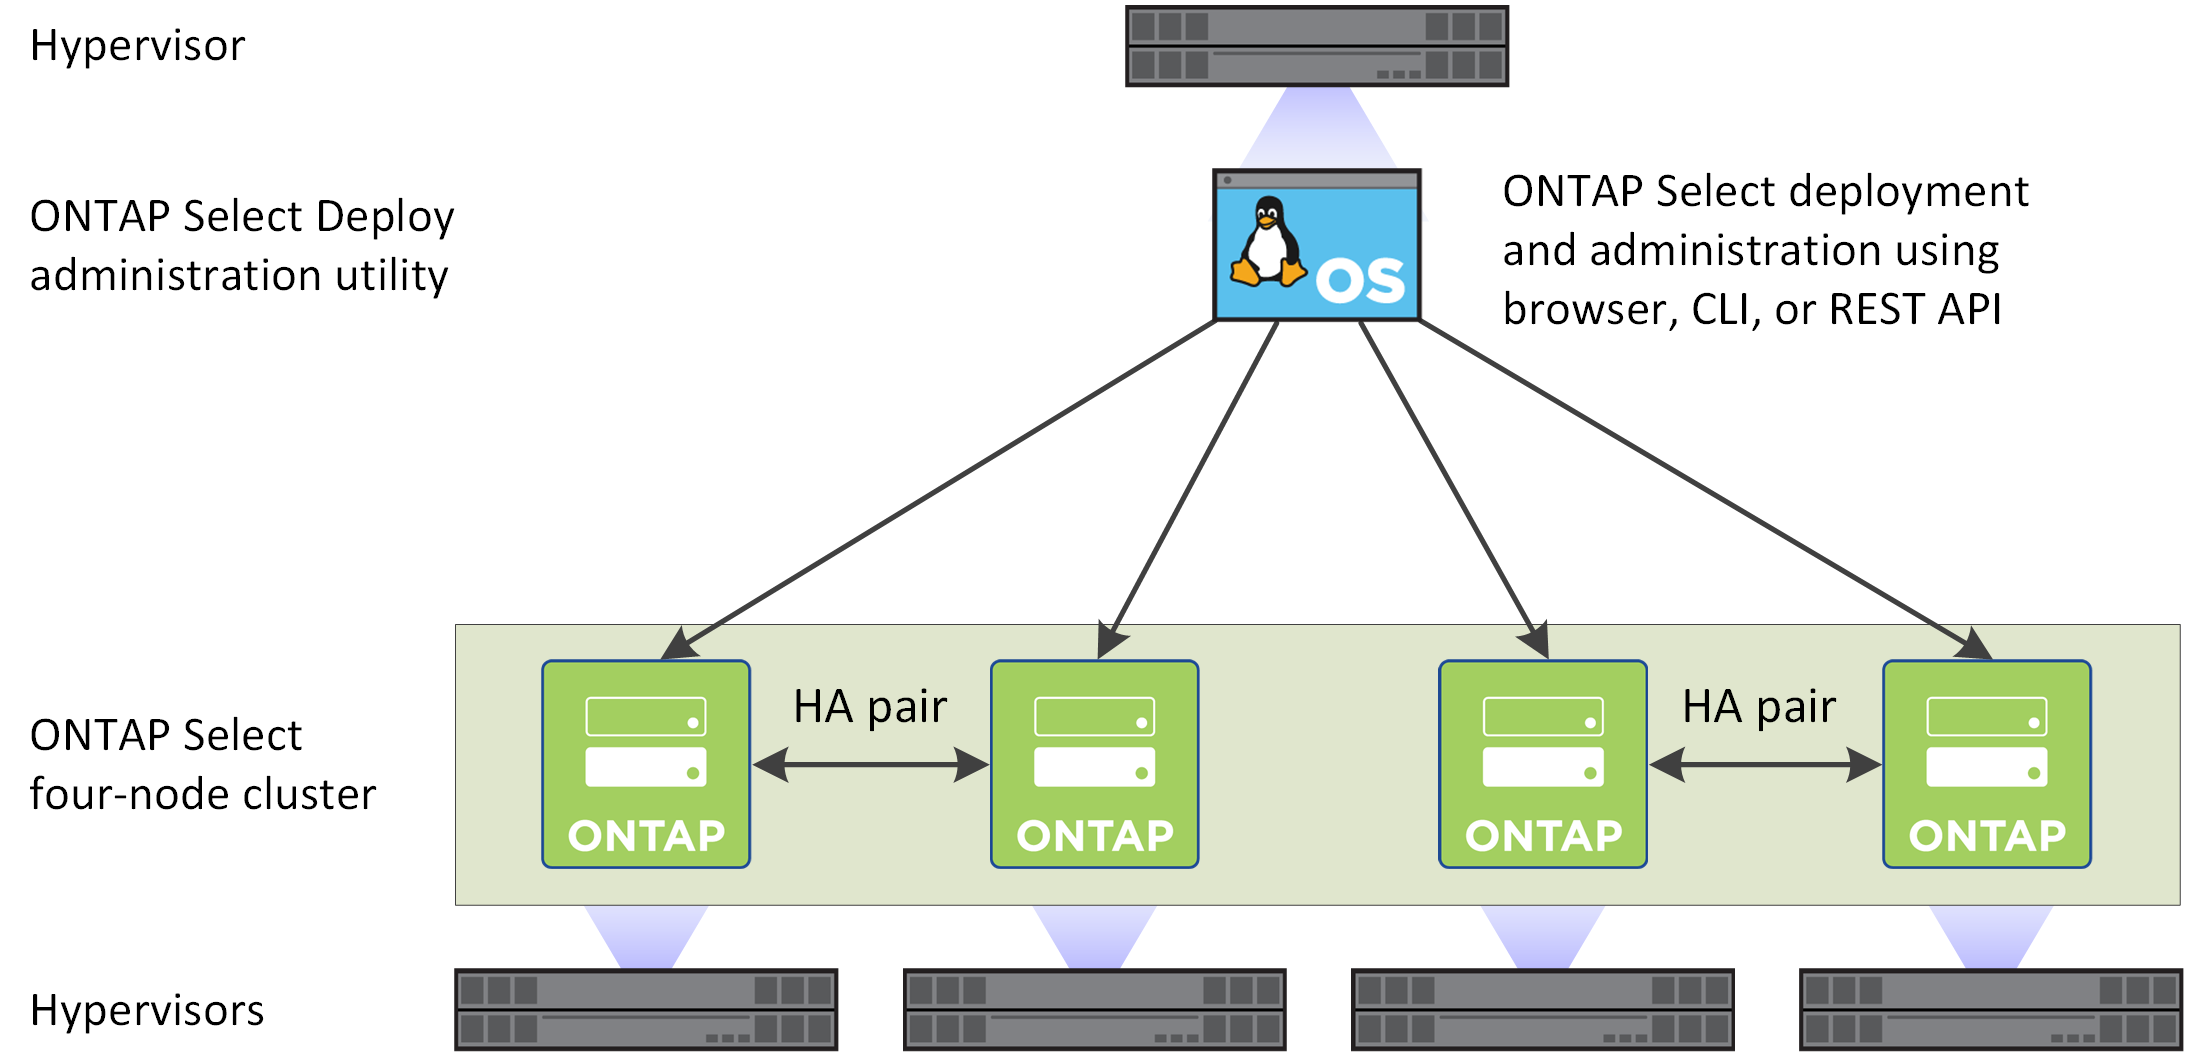 Illustrates a ONTAP Select four-node cluster created with the Deploy administration utility.